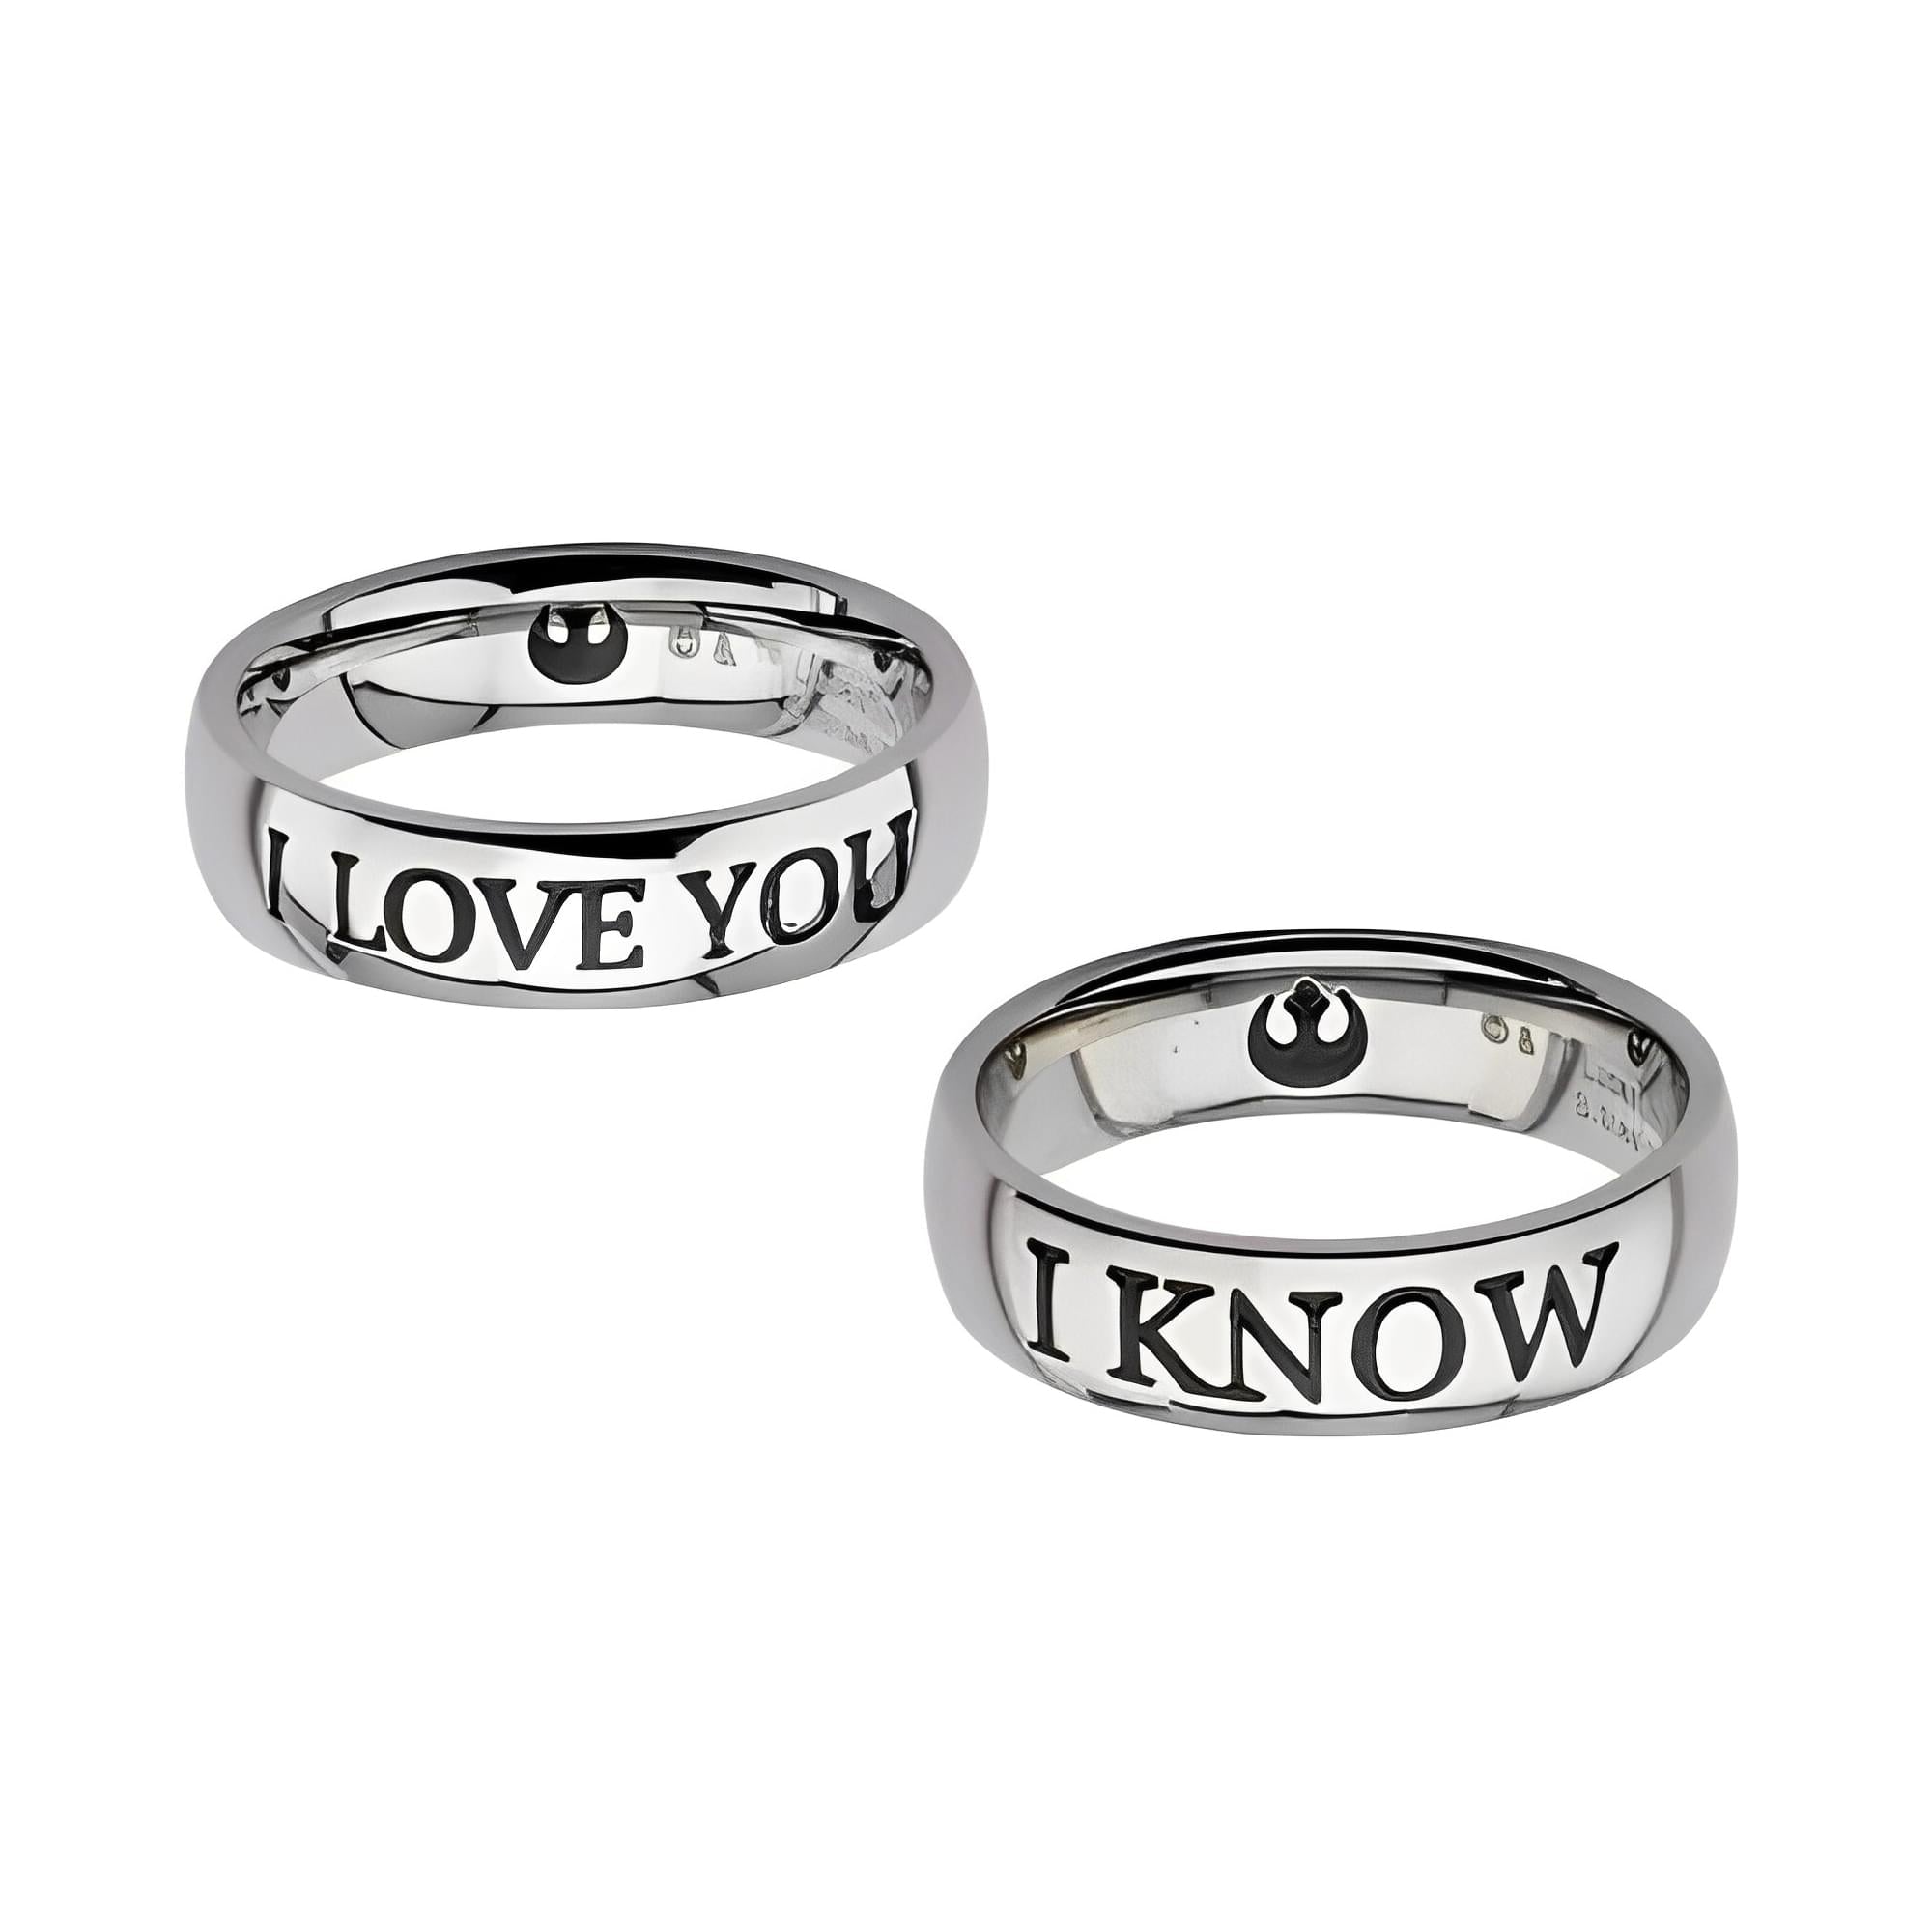 Star Wars I Love You / I Know Ring Set, Women's Size 7, Men's Size 10